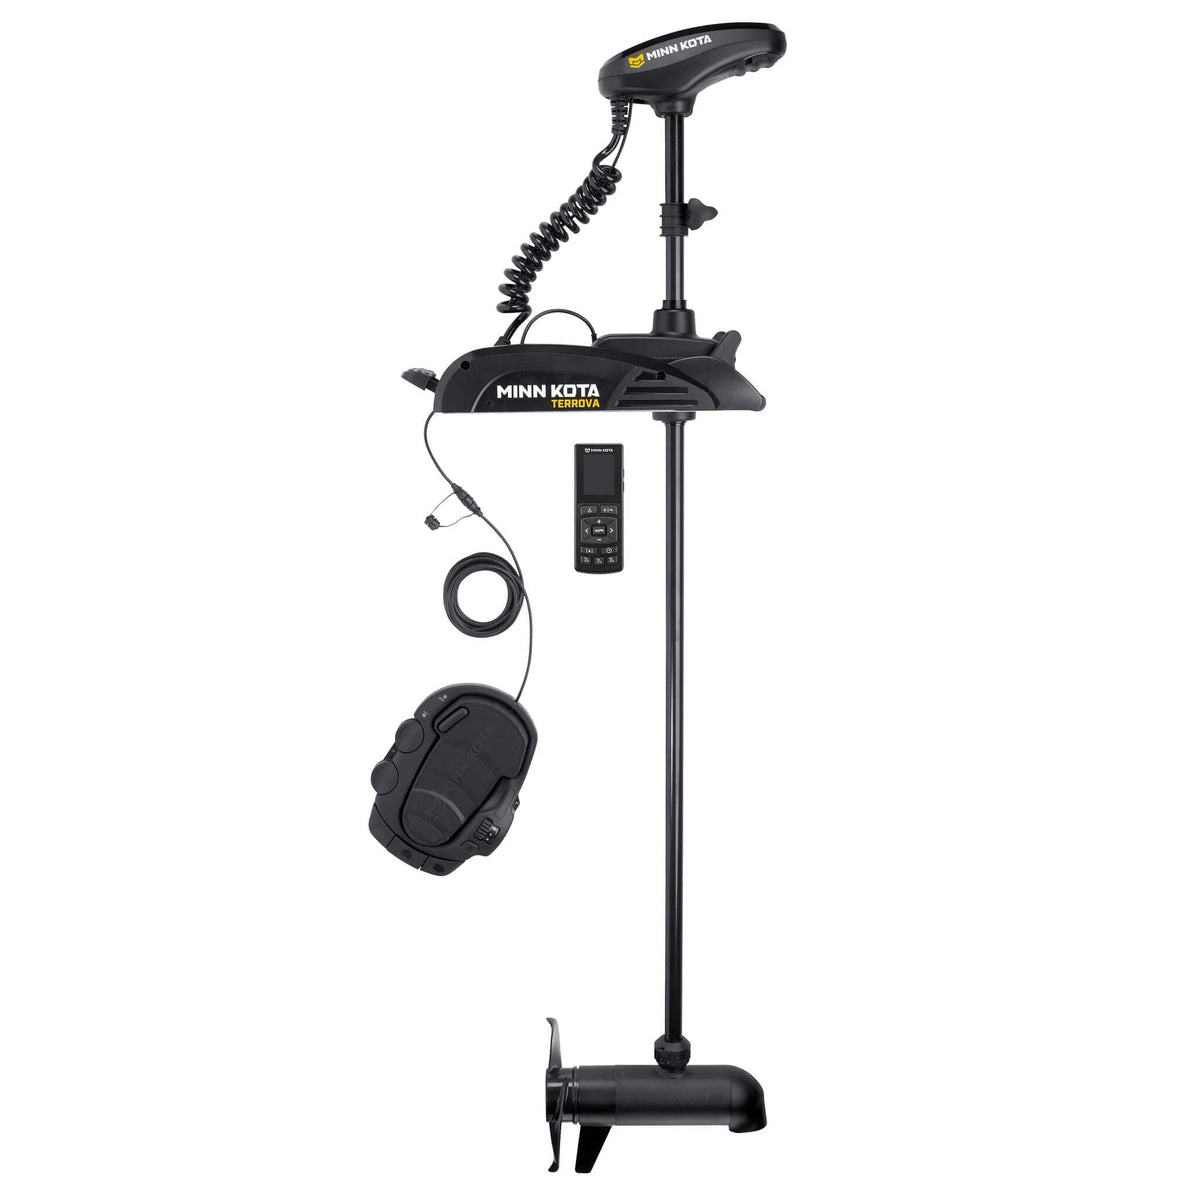 View of trolling_motor Minn Kota Terrova 80lb 24v DSC 60" w/Wireless Remote available at EZOKO Pike and Musky Shop